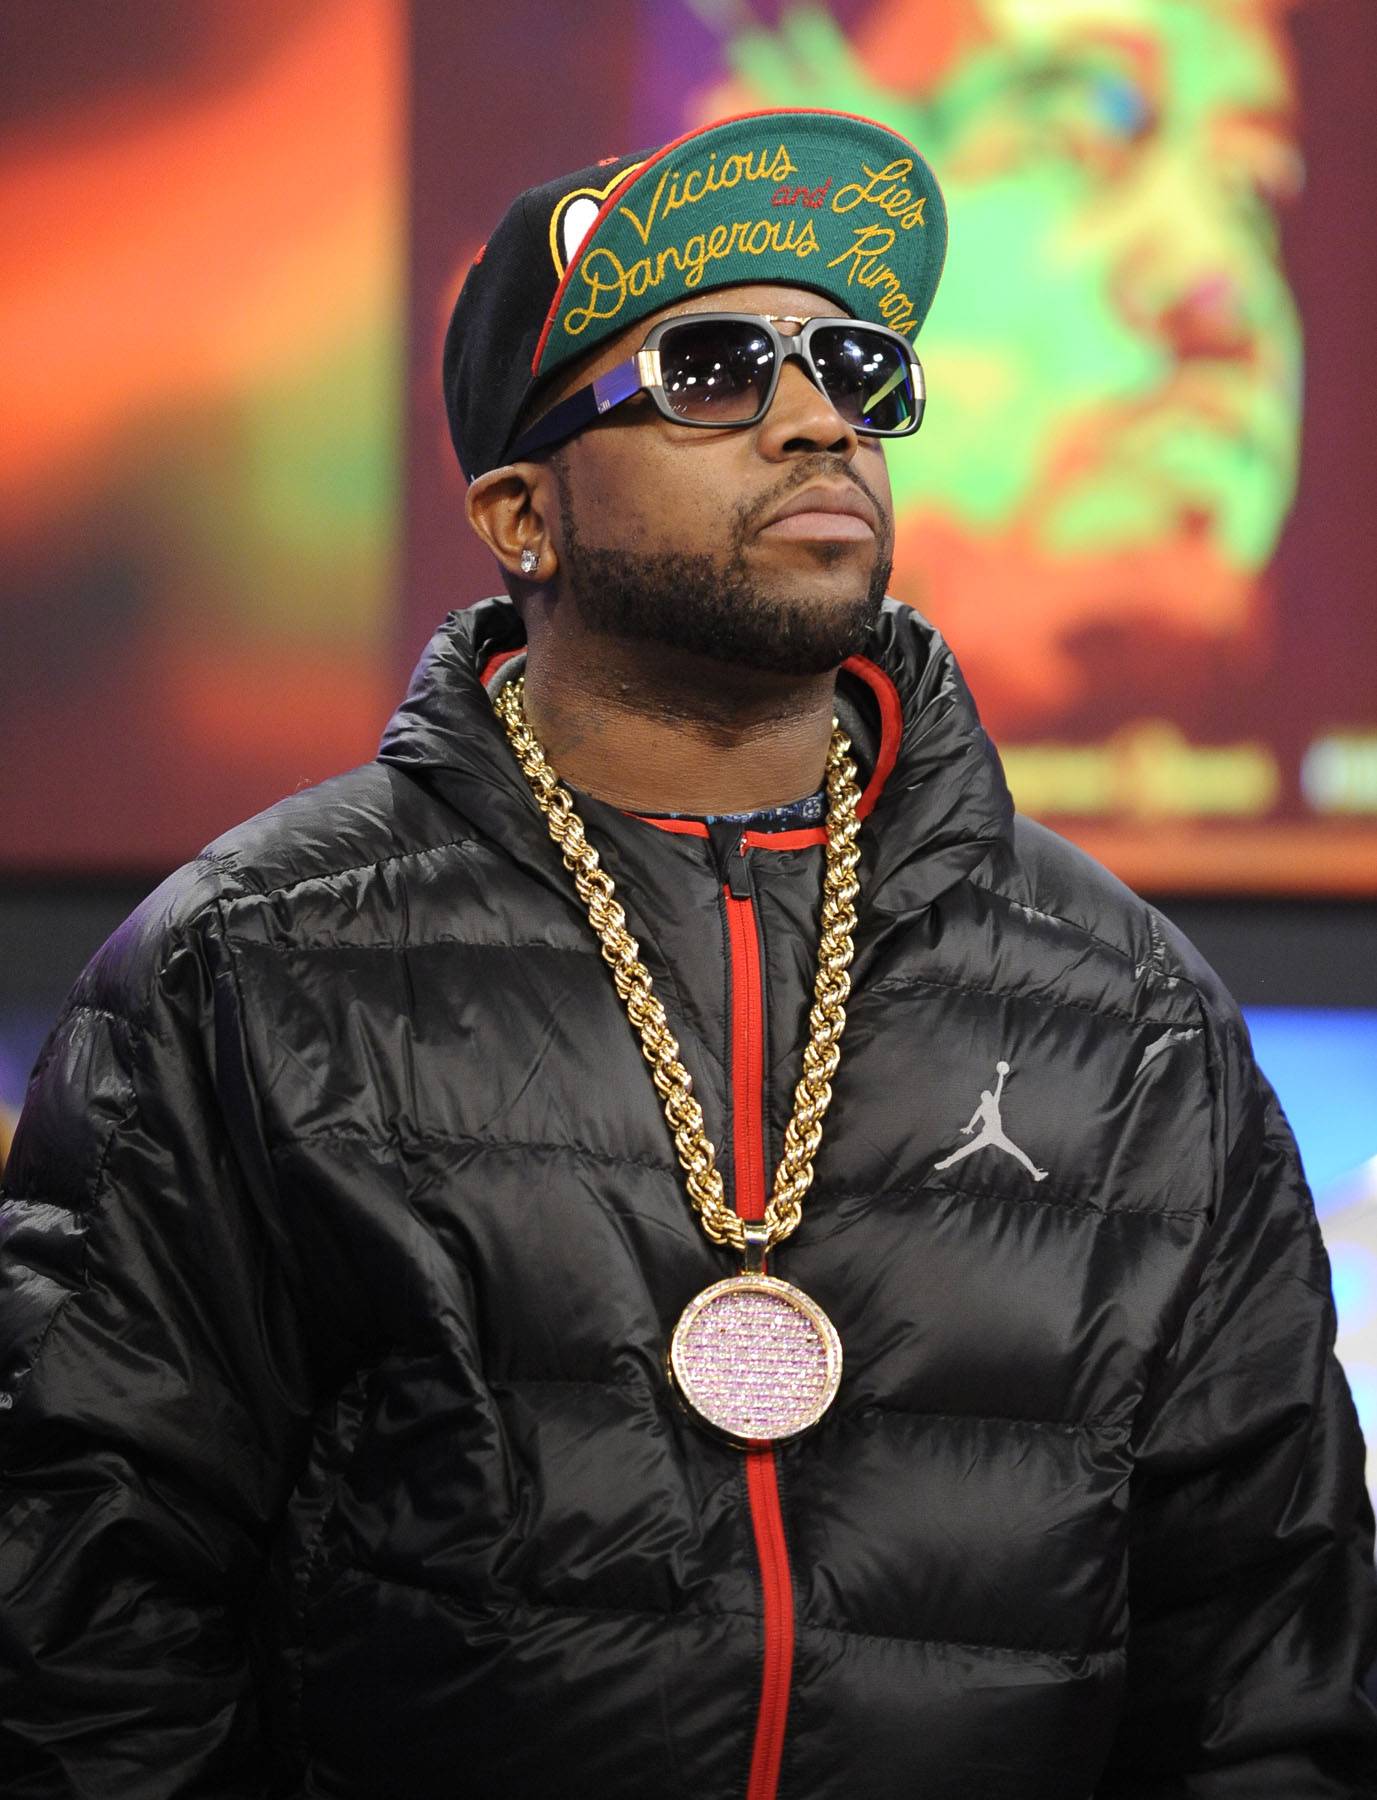 Big Boi @BigBoi - Tweet: #ViciousLiesAndDangerousRumorsBig Boi offers a subtle response (plus a plug for his last solo album) to the wild rumor that his soon-to-be ex-wife found inappropriate photos of Outkast partner, Andre 3000, in the rapper’s cellphone. (photo: John Ricard / BET)